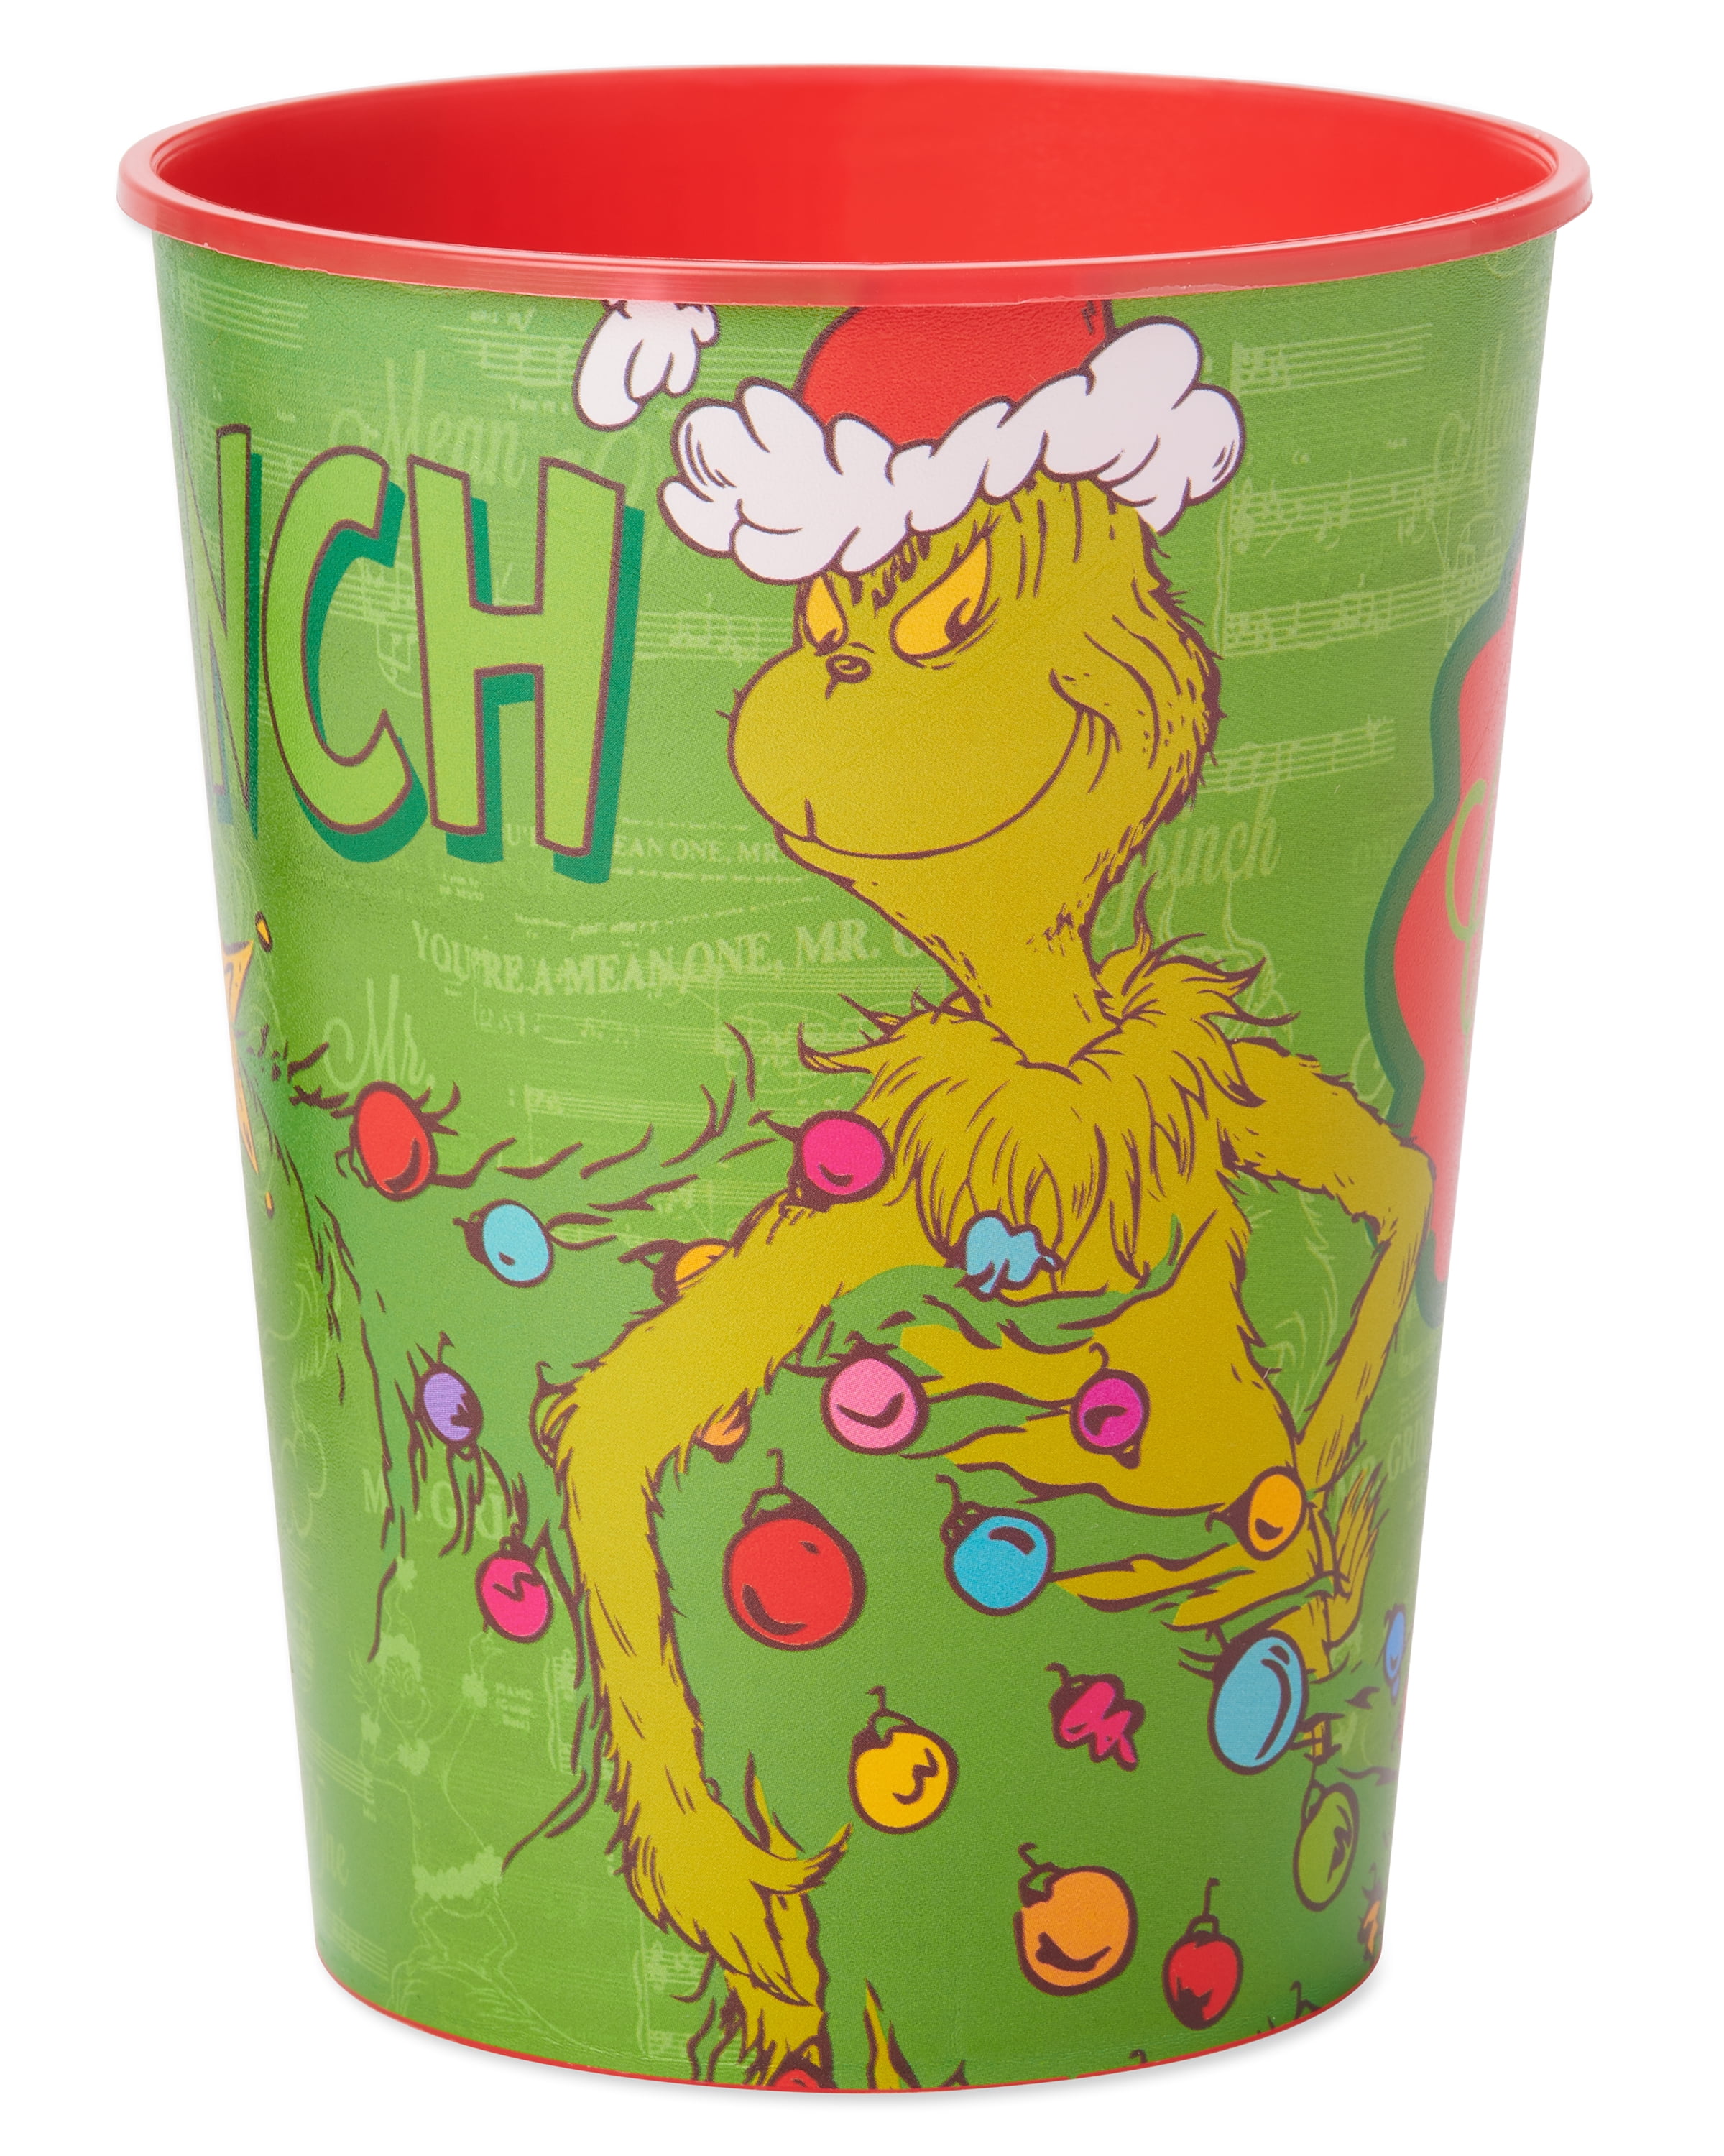 American Greetings Grinch Christmas 16 Oz Plastic Party Cup 8 Count Walmart Com